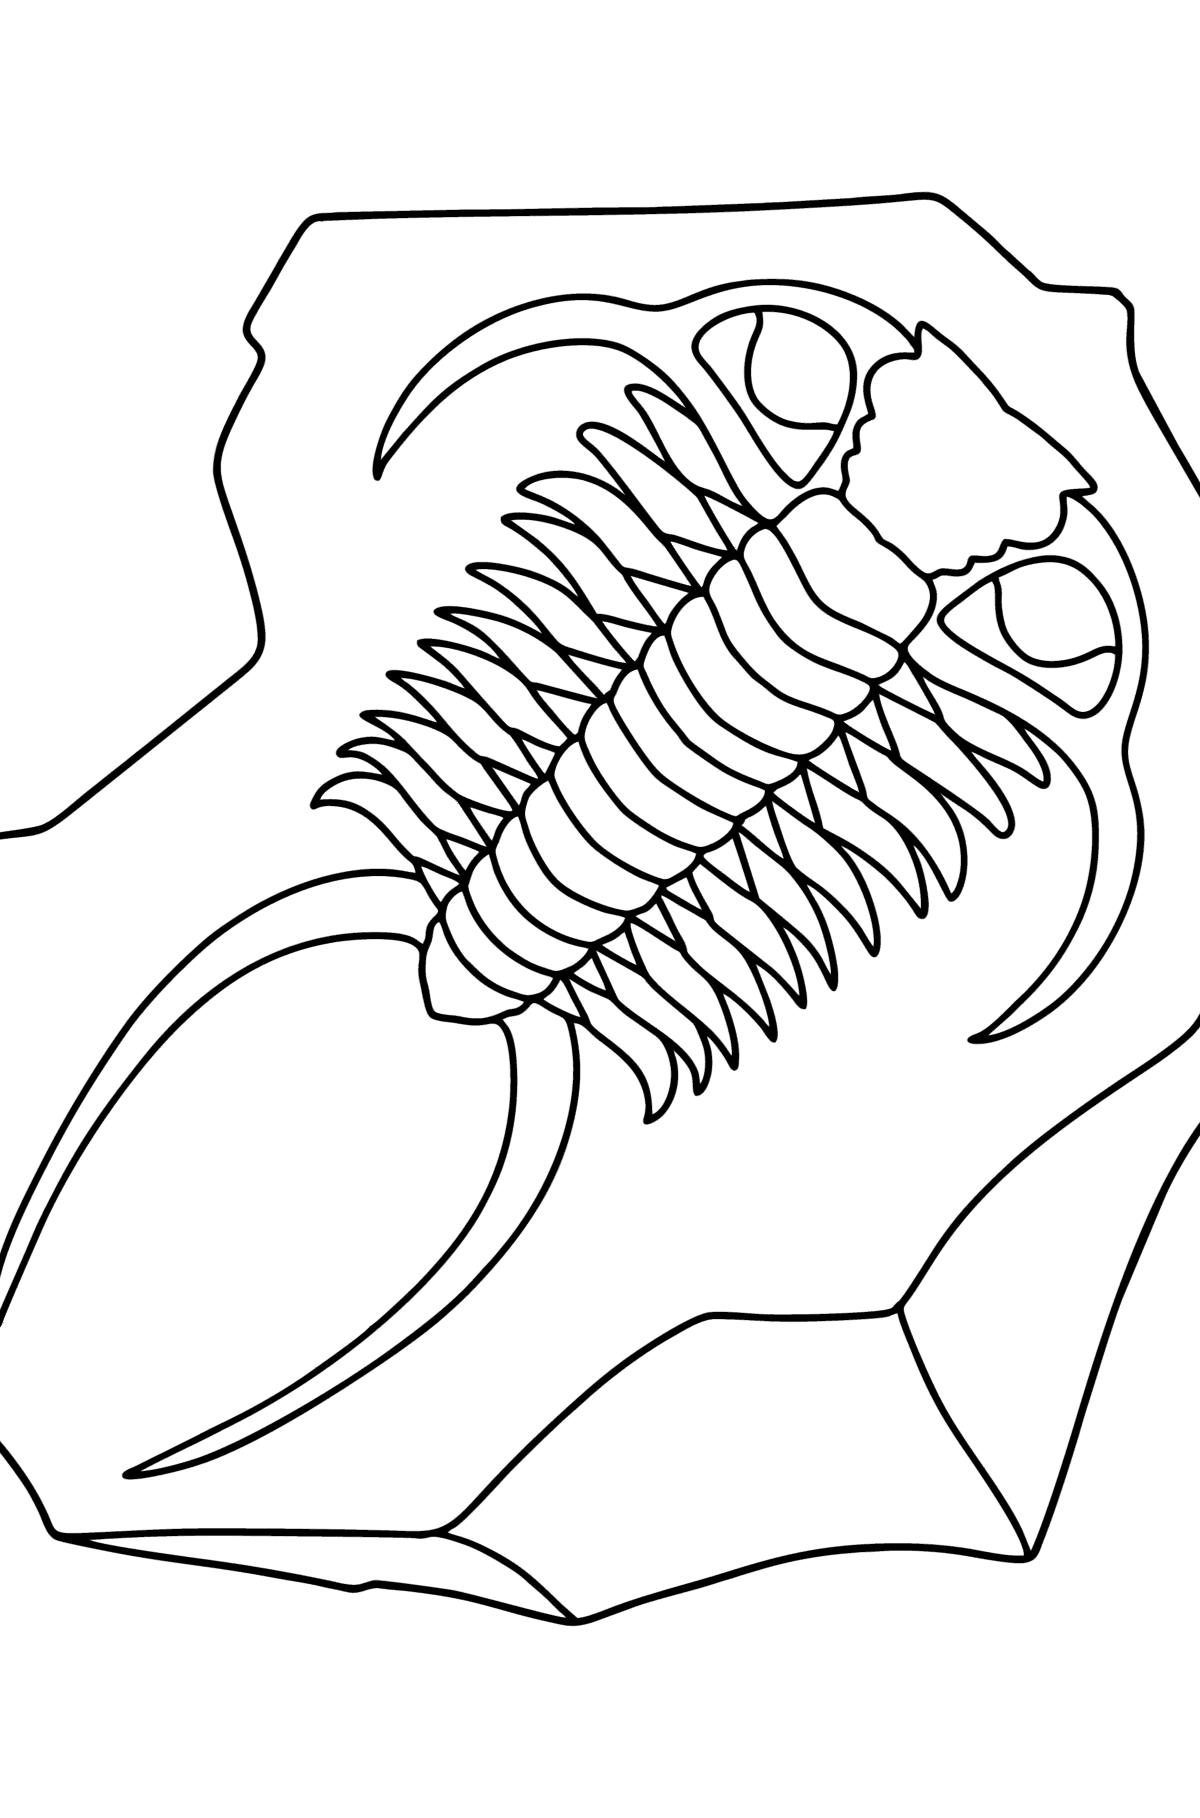 Sea Fossil coloring page - Coloring Pages for Kids